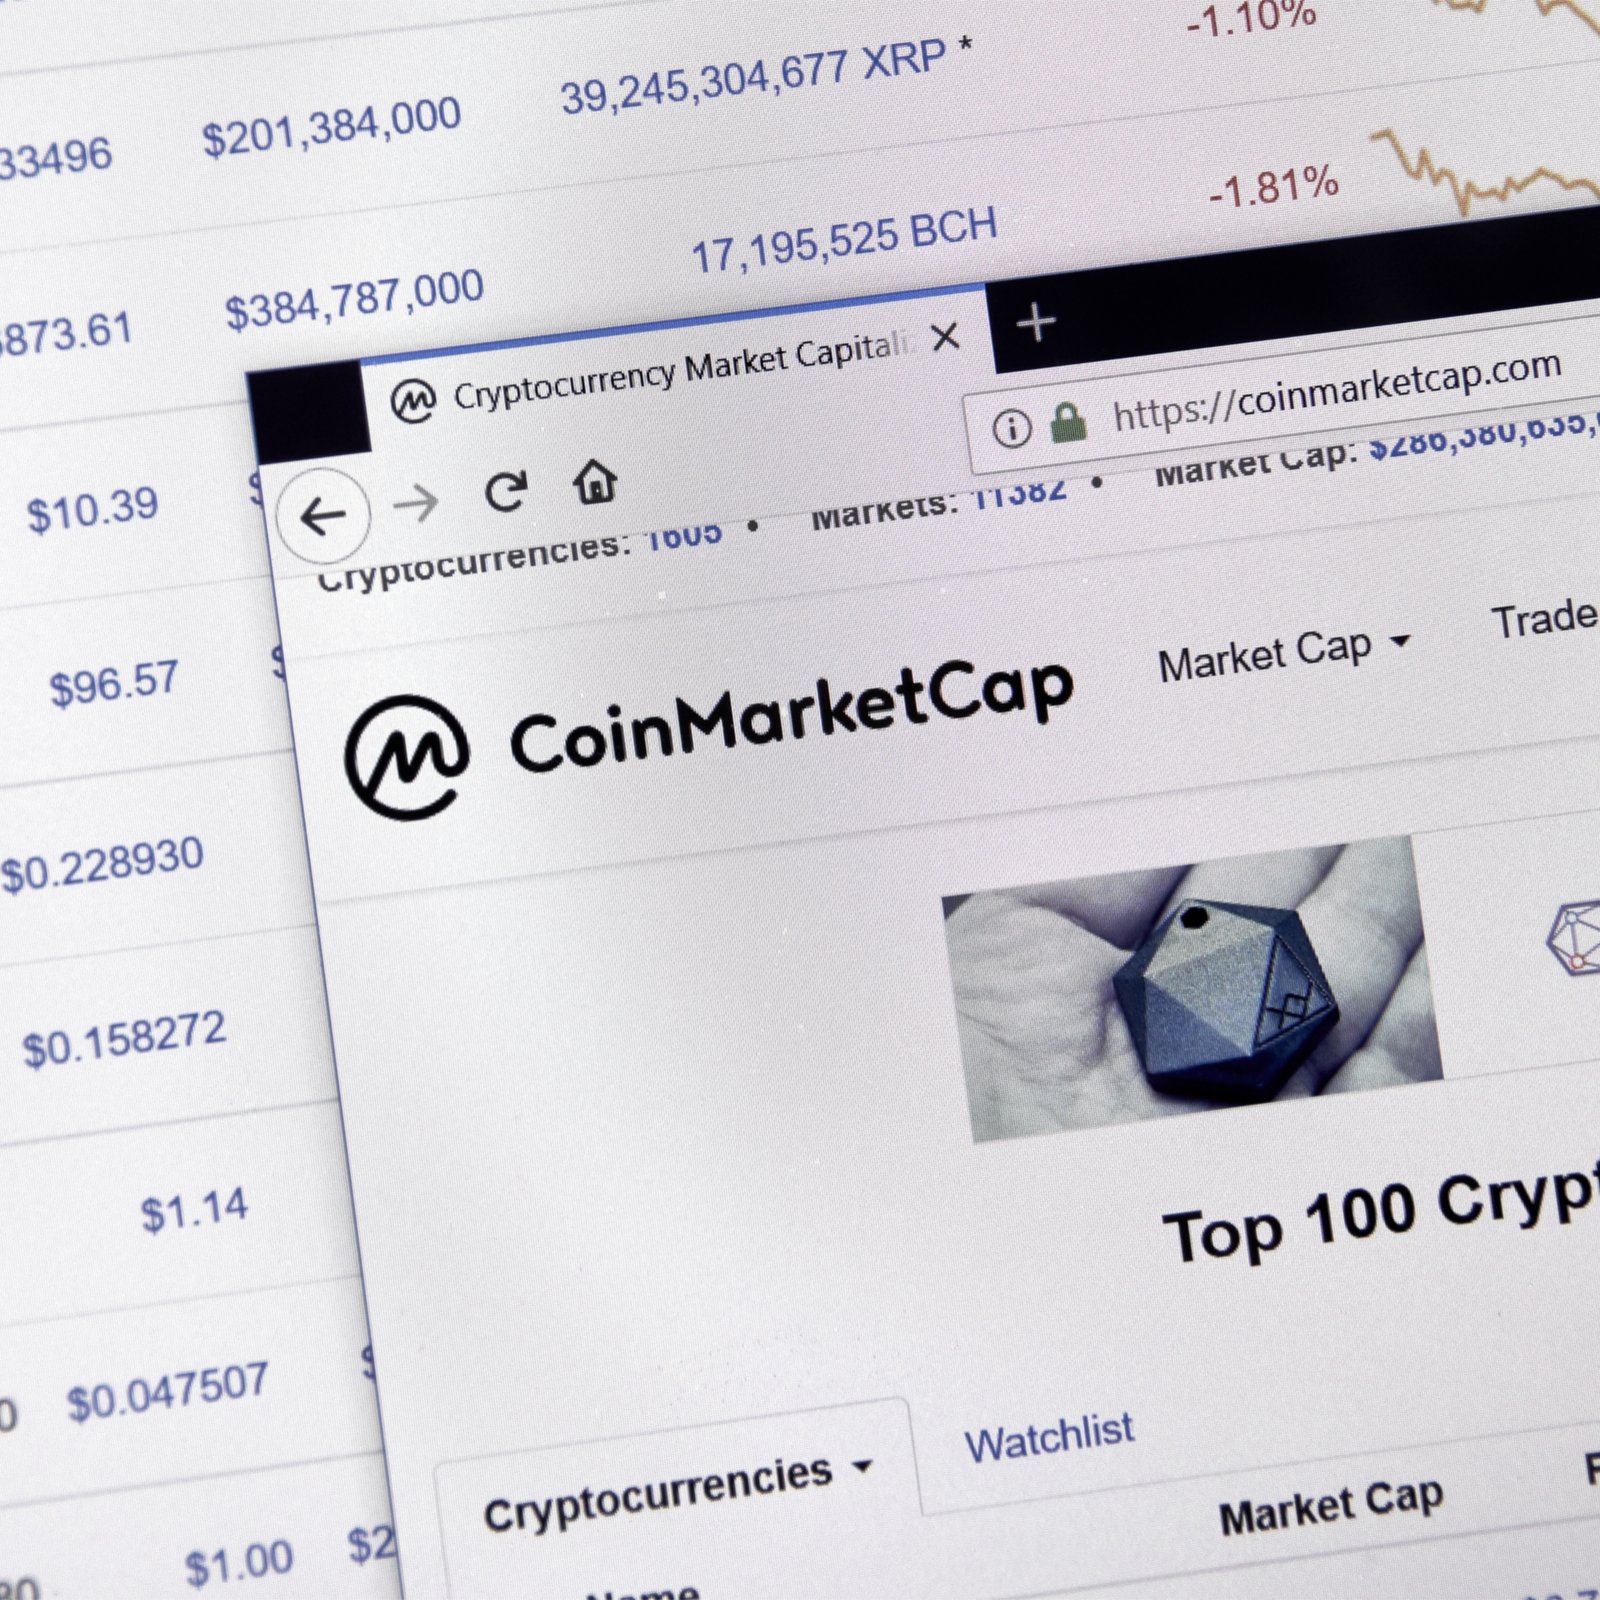 Coinmarketcap Launches Professional API and Adds Derivatives Markets